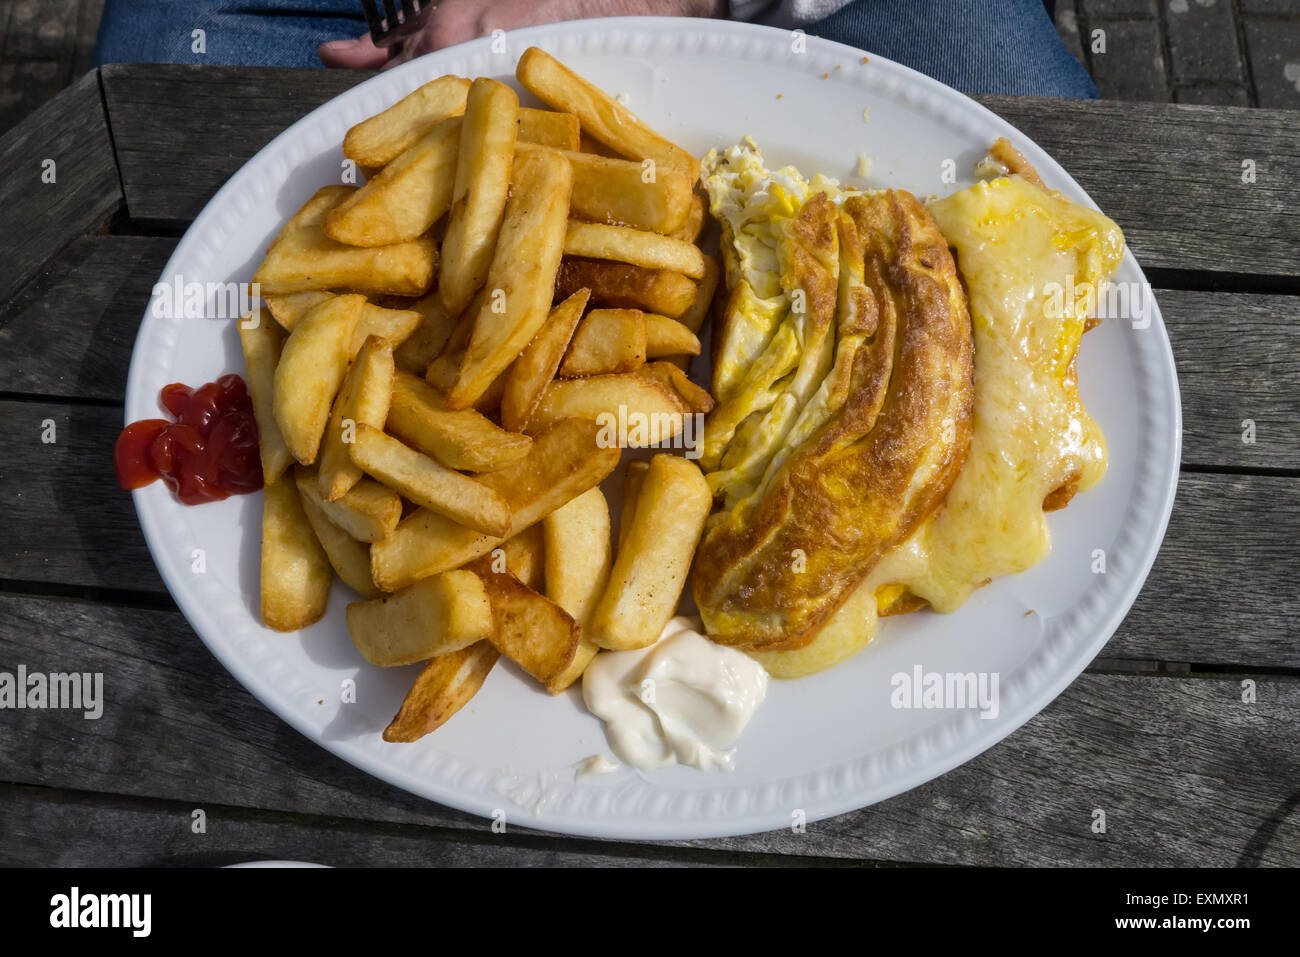 Cornwall, England. Käse Omelette und Chips, Mayonaise und Ketchup. Stockfoto